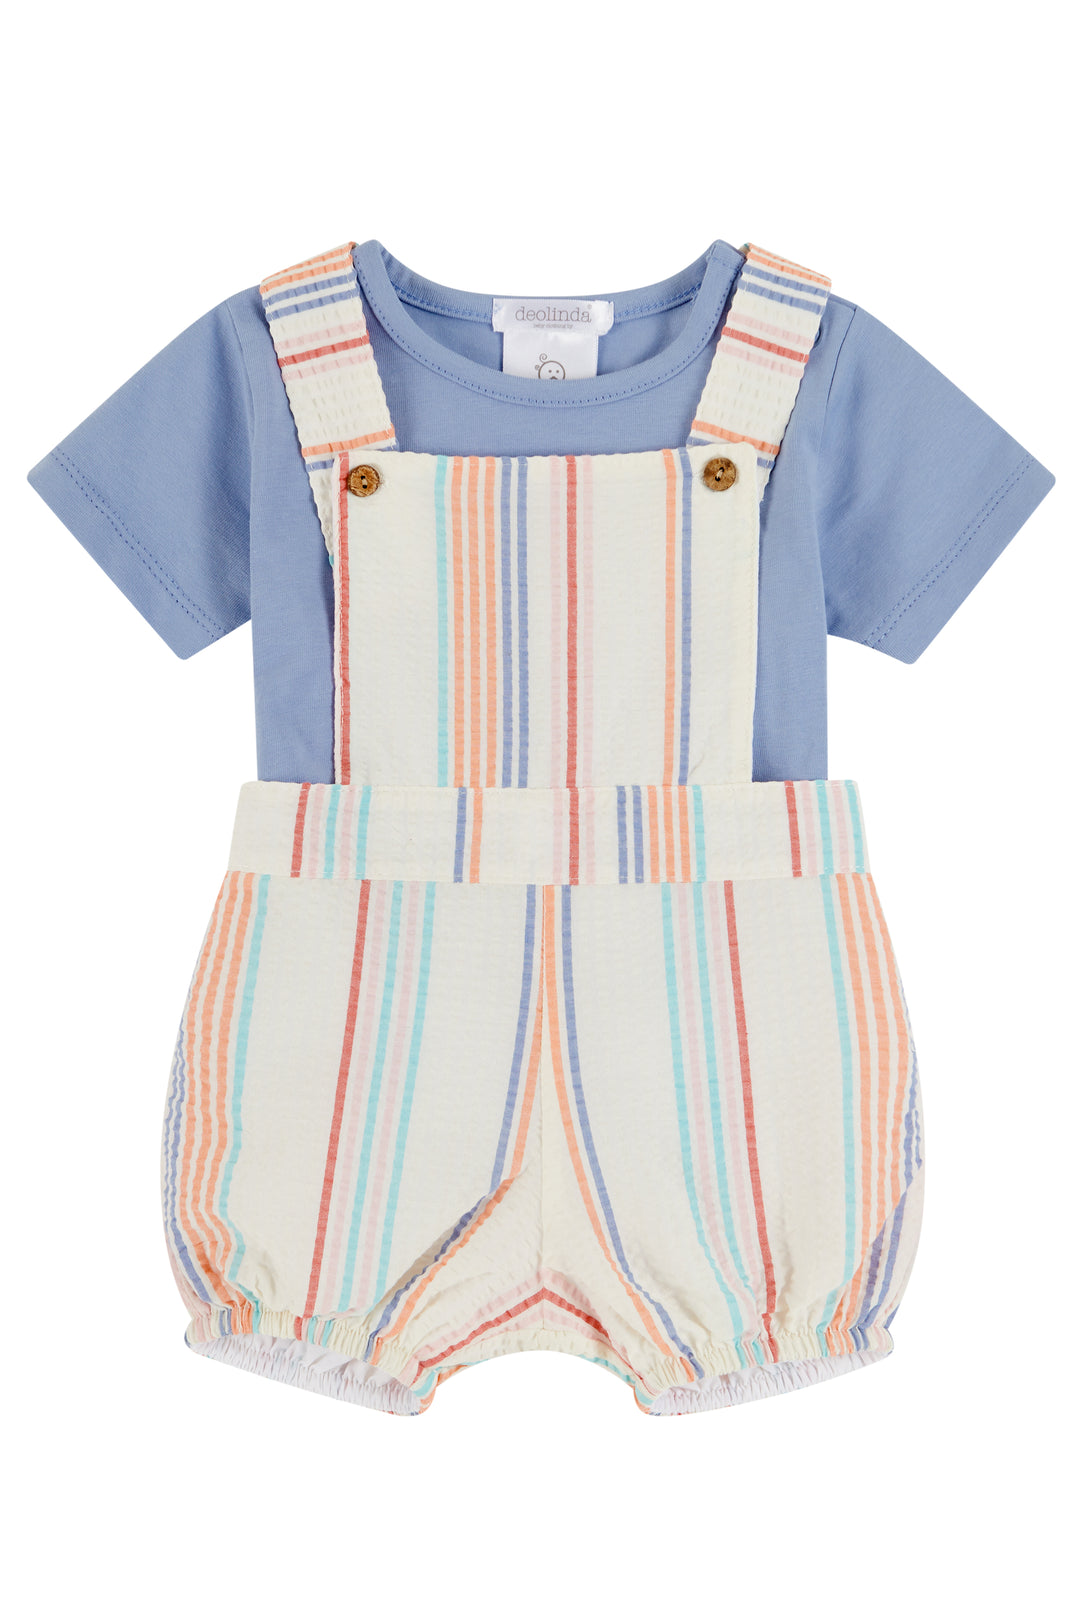 Deolinda "Zane" Dusky Blue Top & Striped Dungaree | iphoneandroidapplications